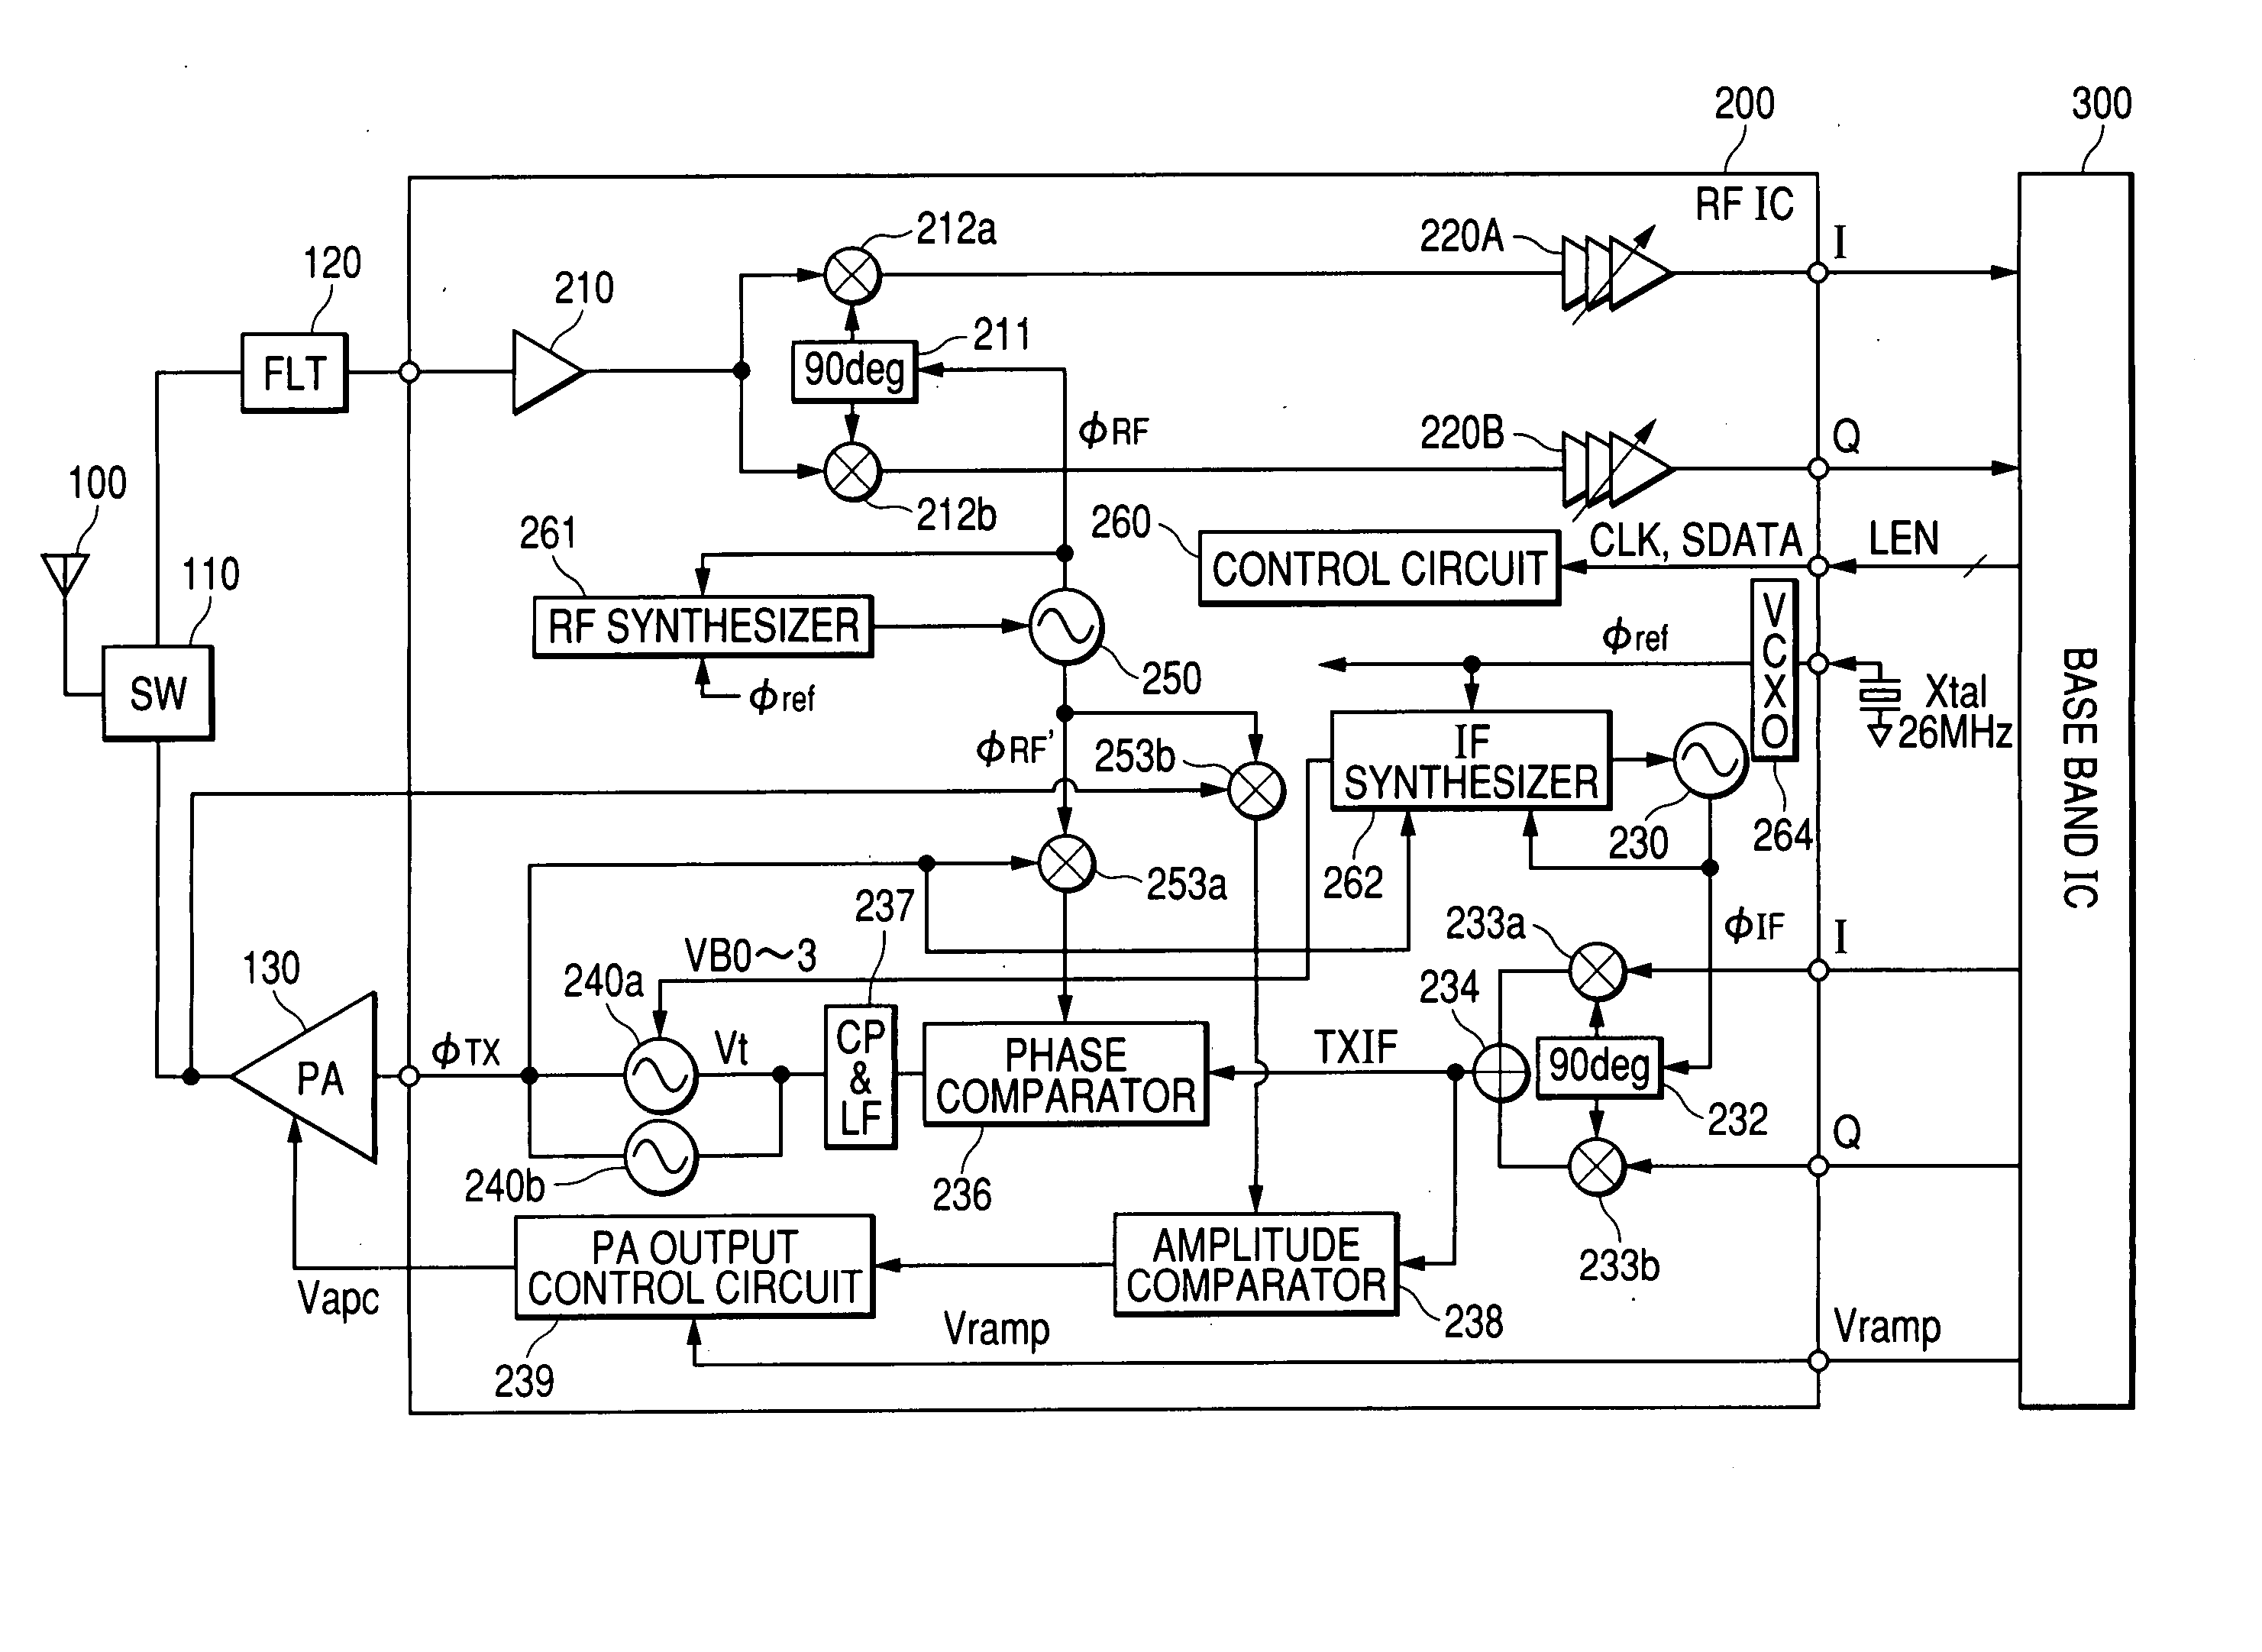 Communication semiconductor integrated circuit device